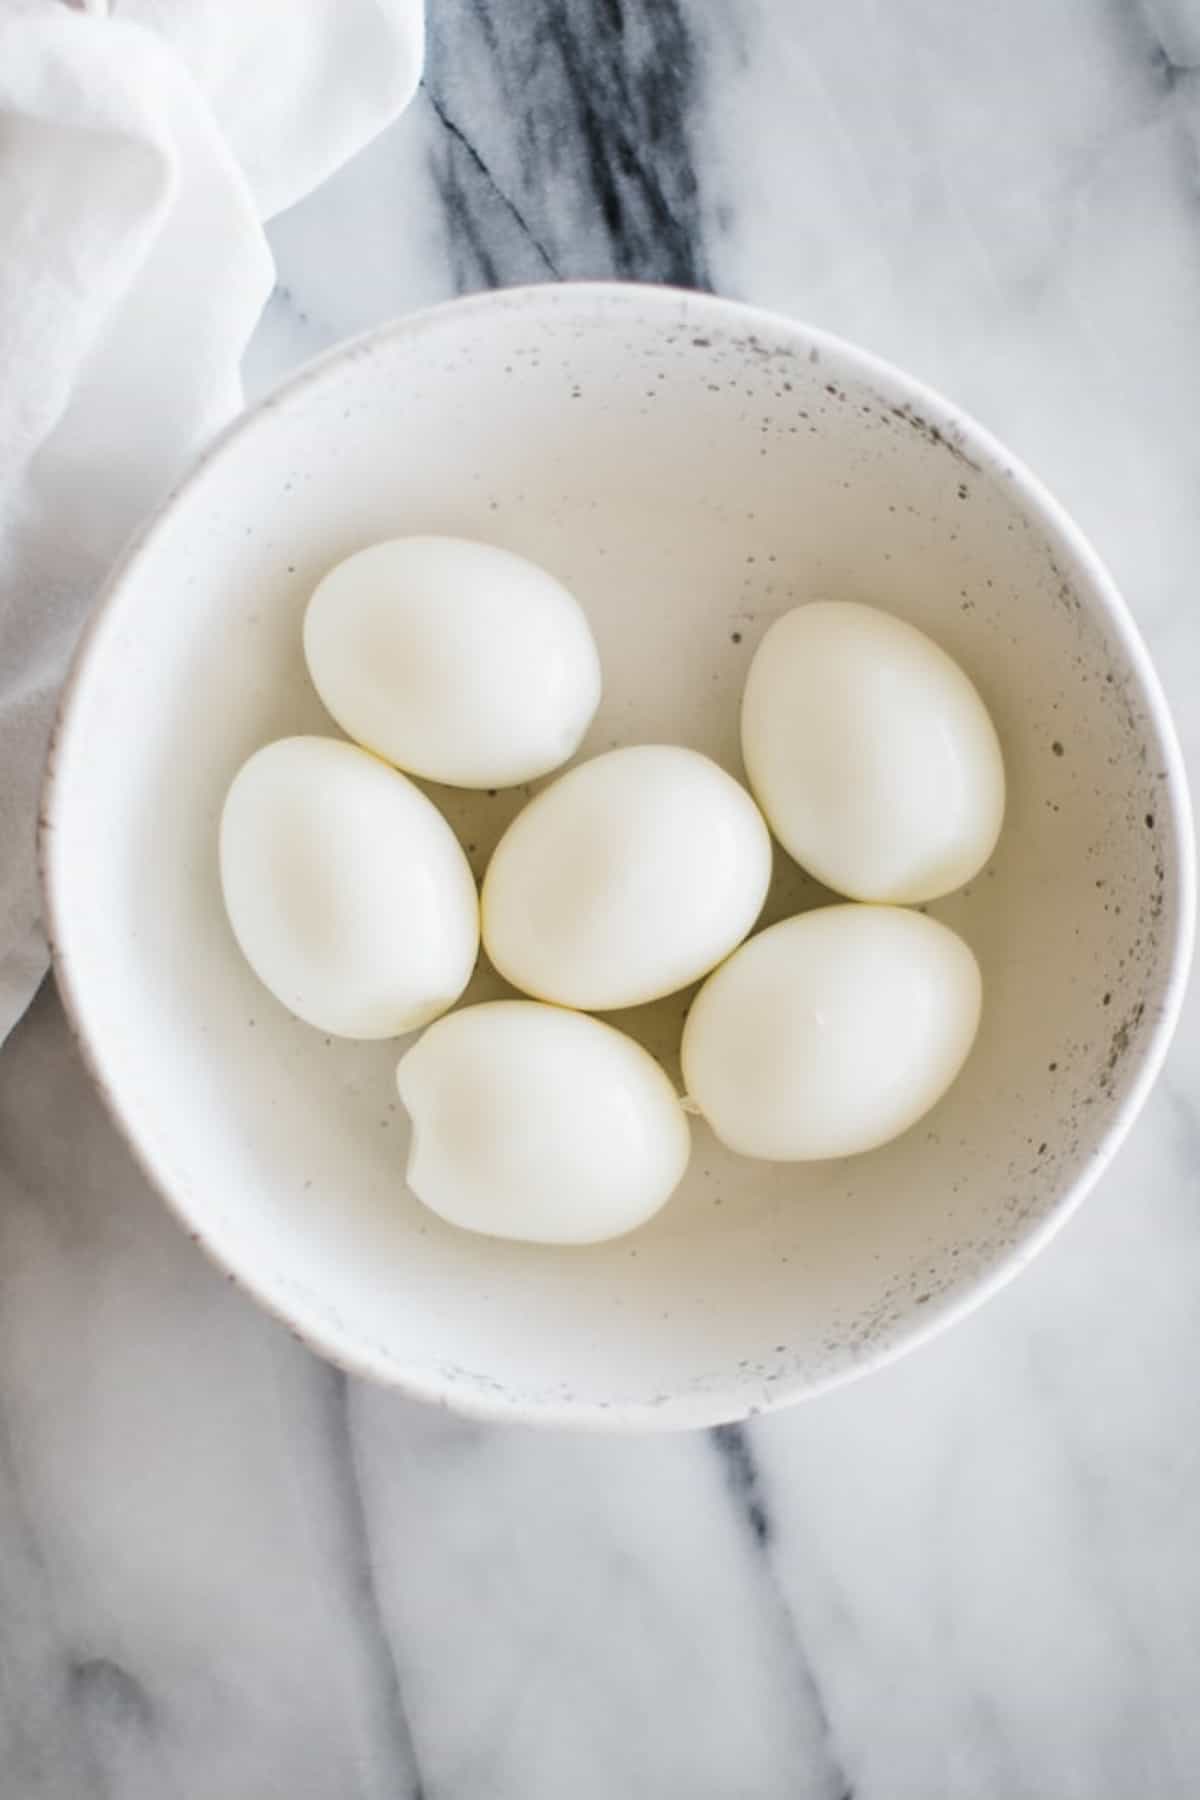 several hard boiled eggs in a bowl